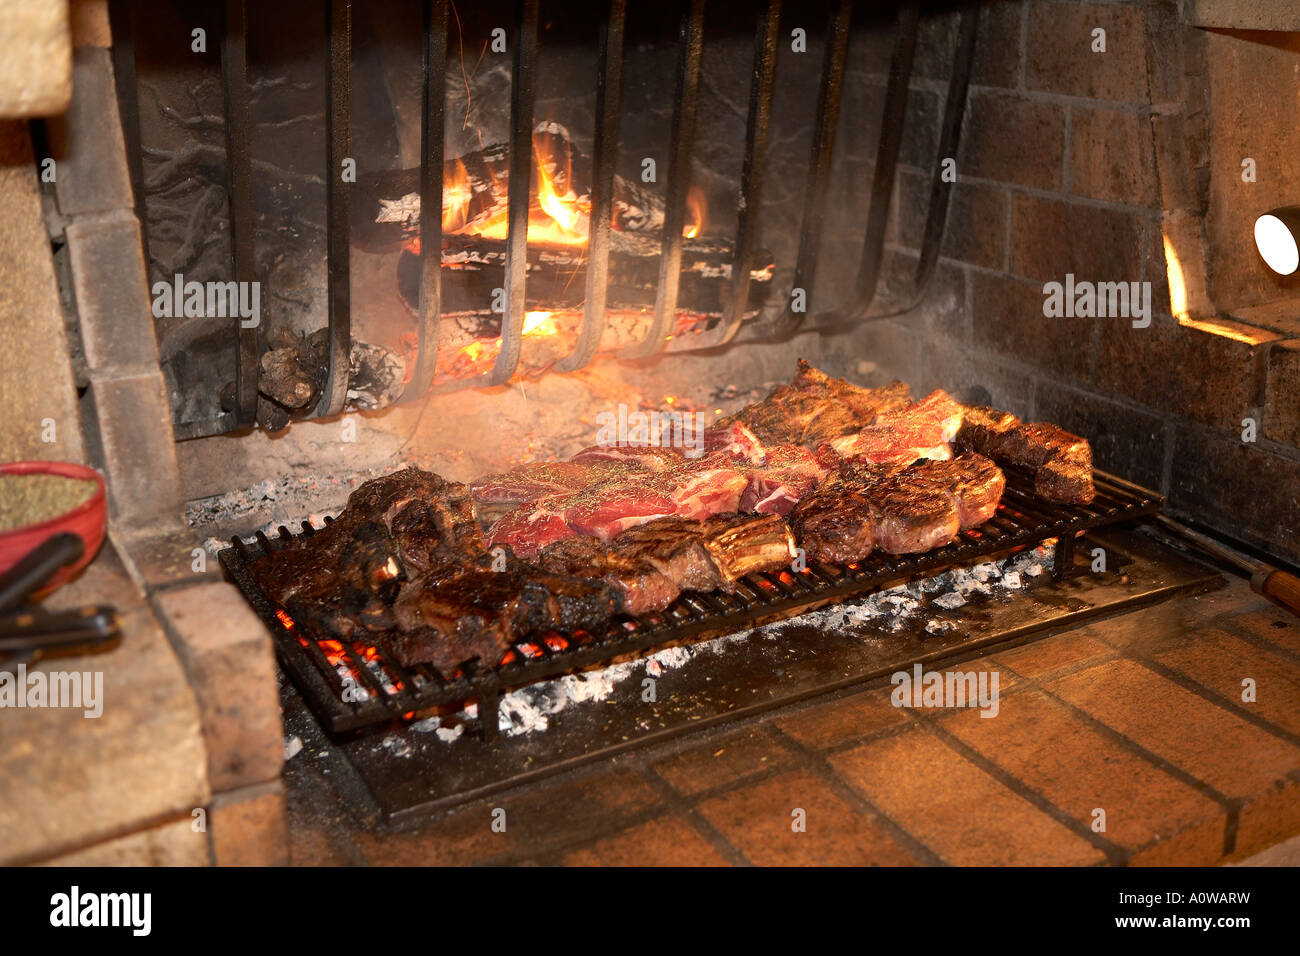 MEAT COOKING ON AN OPEN FIRE IN A FRENCH RESTAURANT IN THE SOUTH OF FRANCE Stock Photo